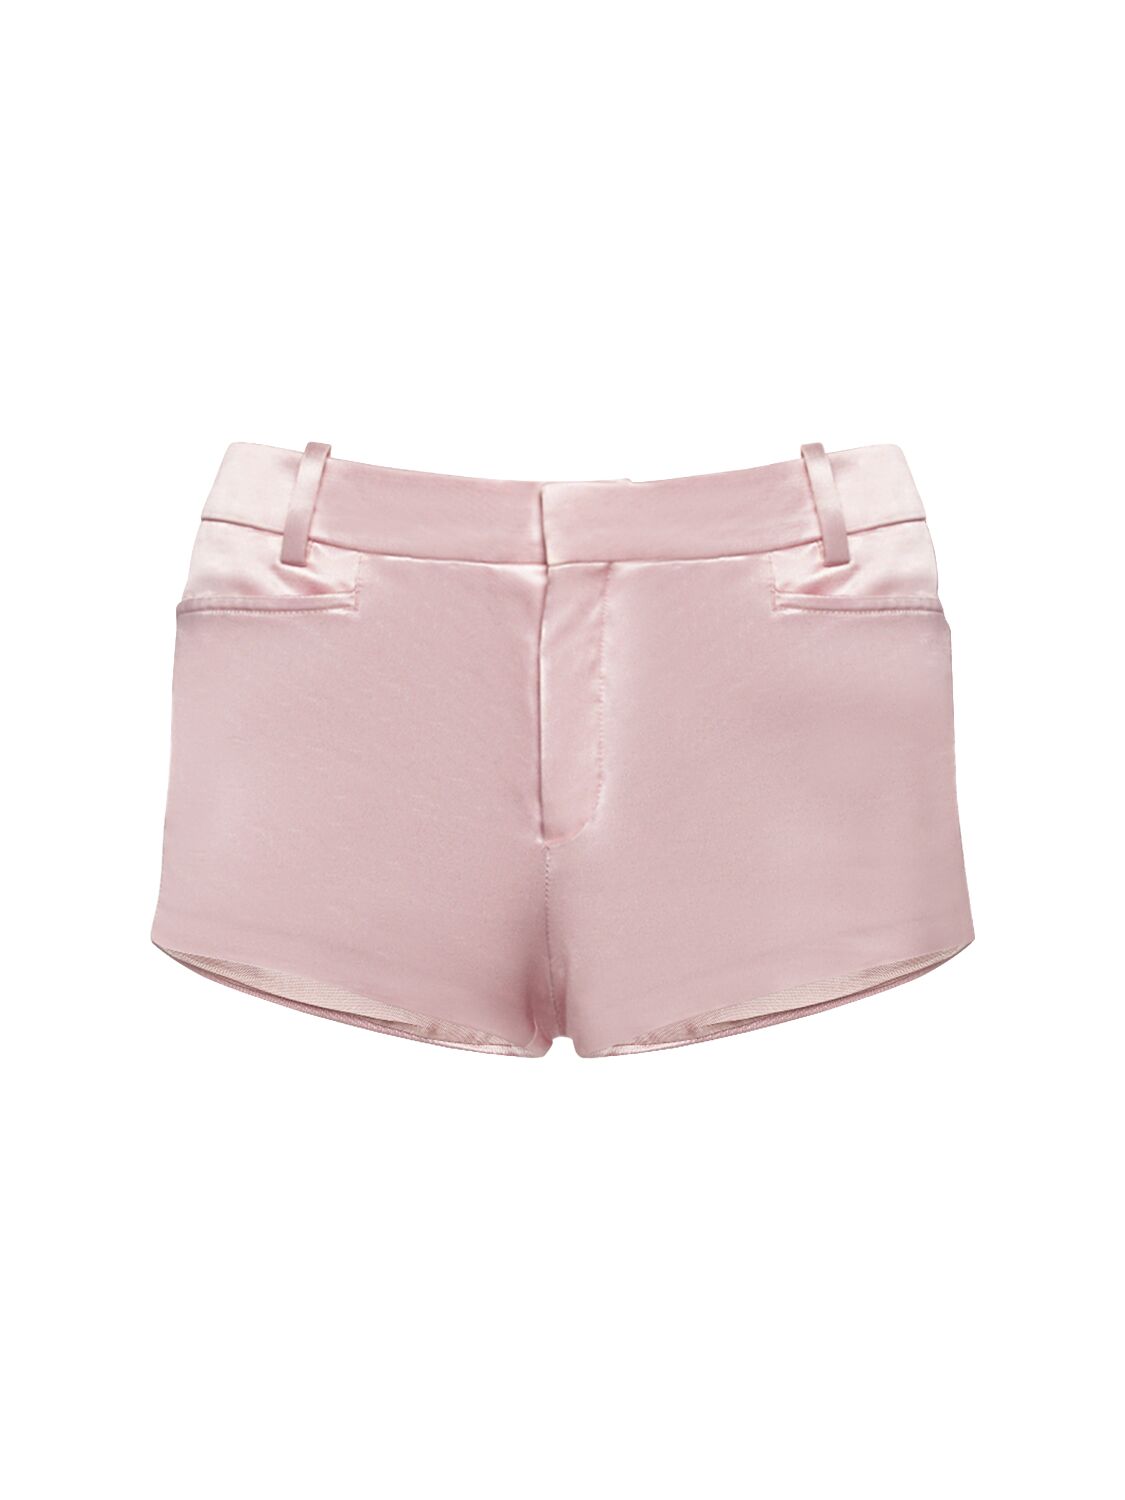 Tom Ford Cotton Blend Duchesse Shorts In Light Pink